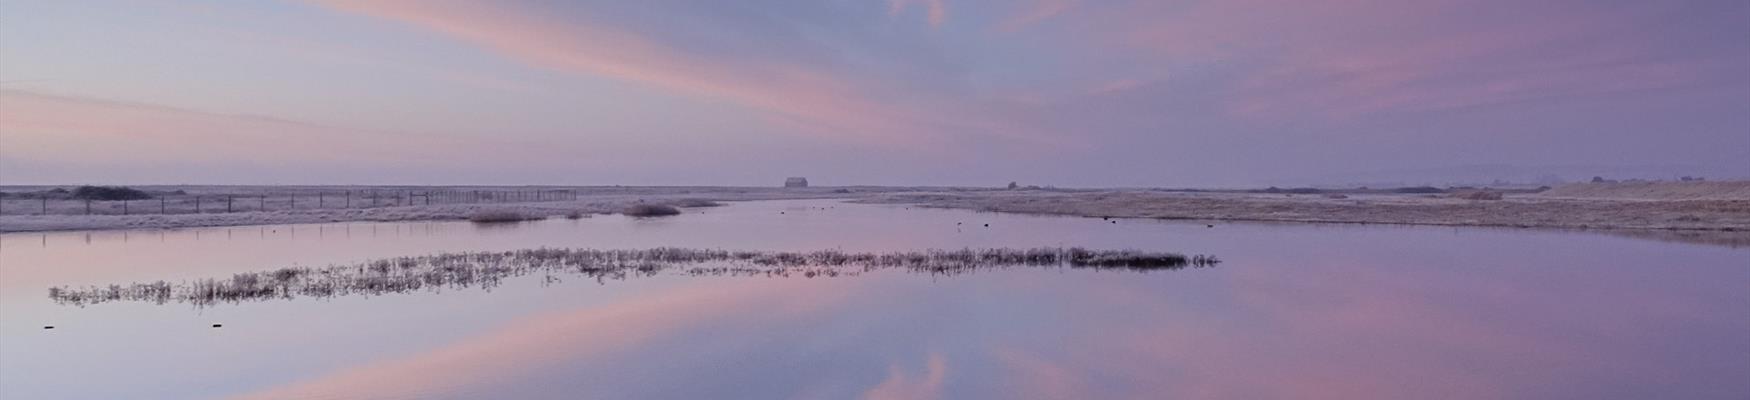 Winter sunrise at Rye Harbour Nature Reserve, East Sussex